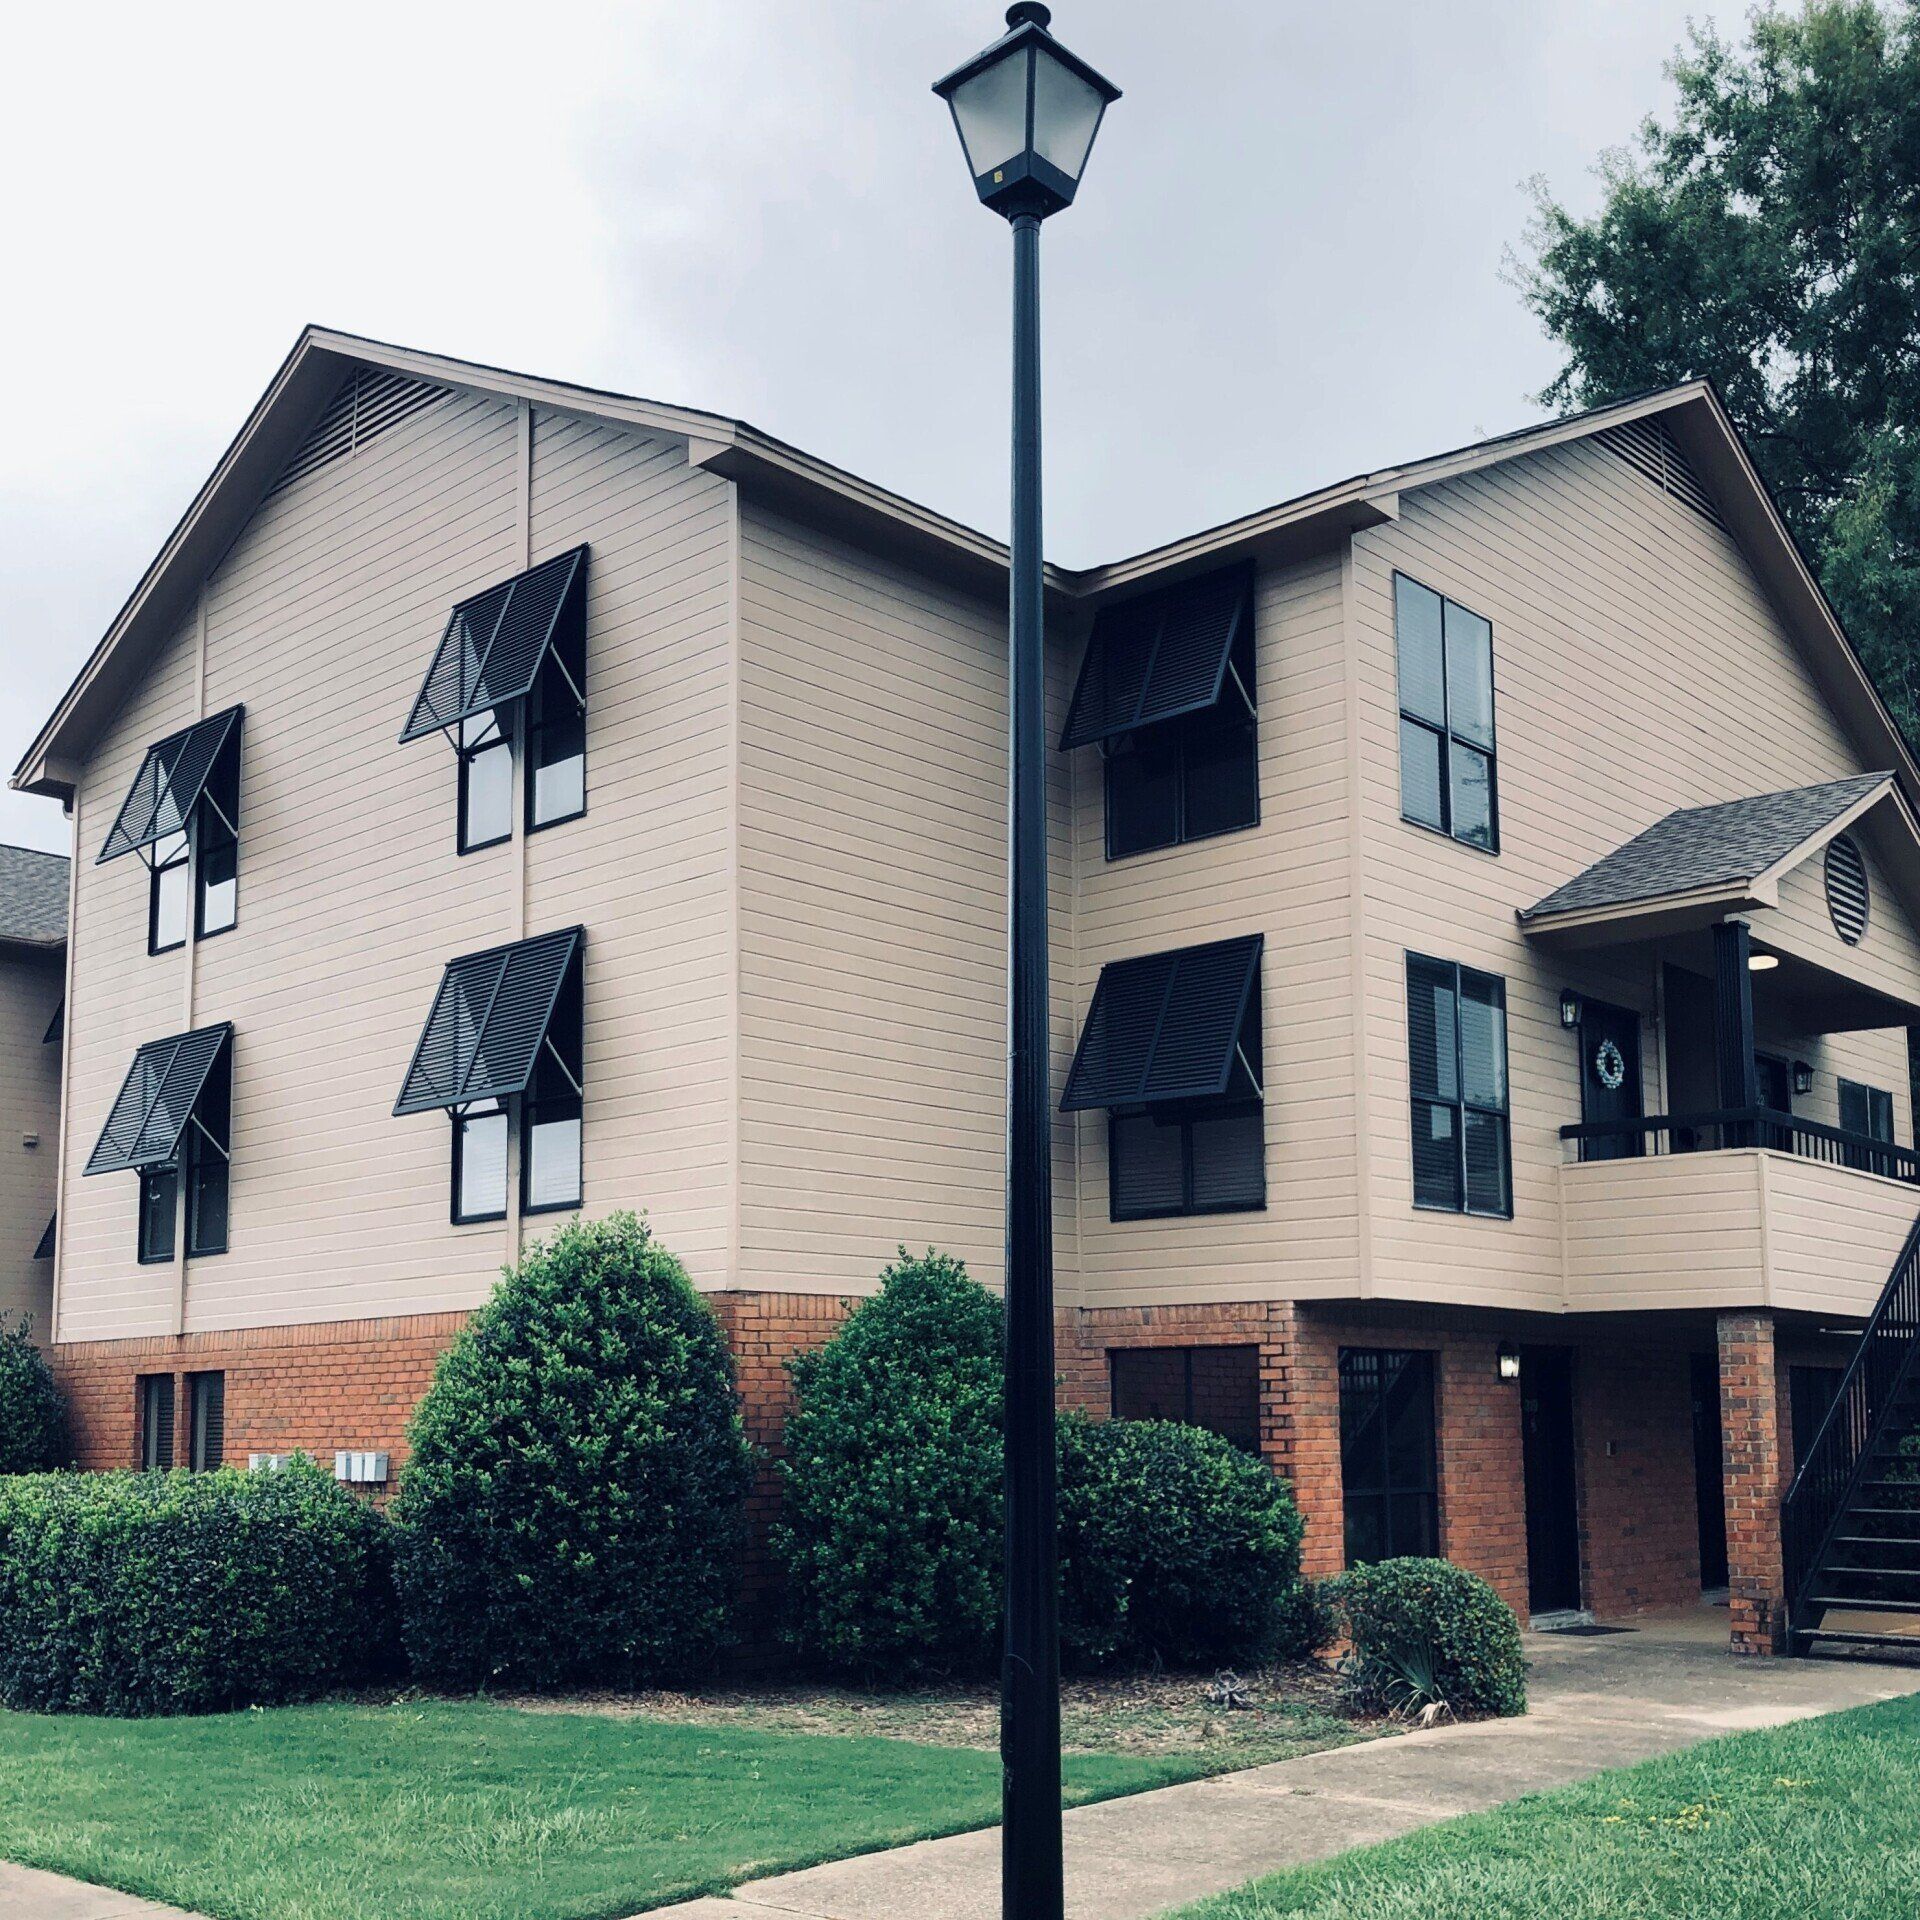 pro tinting service - Before SPF Preferred Residential Tint Saved Thousands in monthly energy costs for building 3 of Arbors on Taylor apartments.